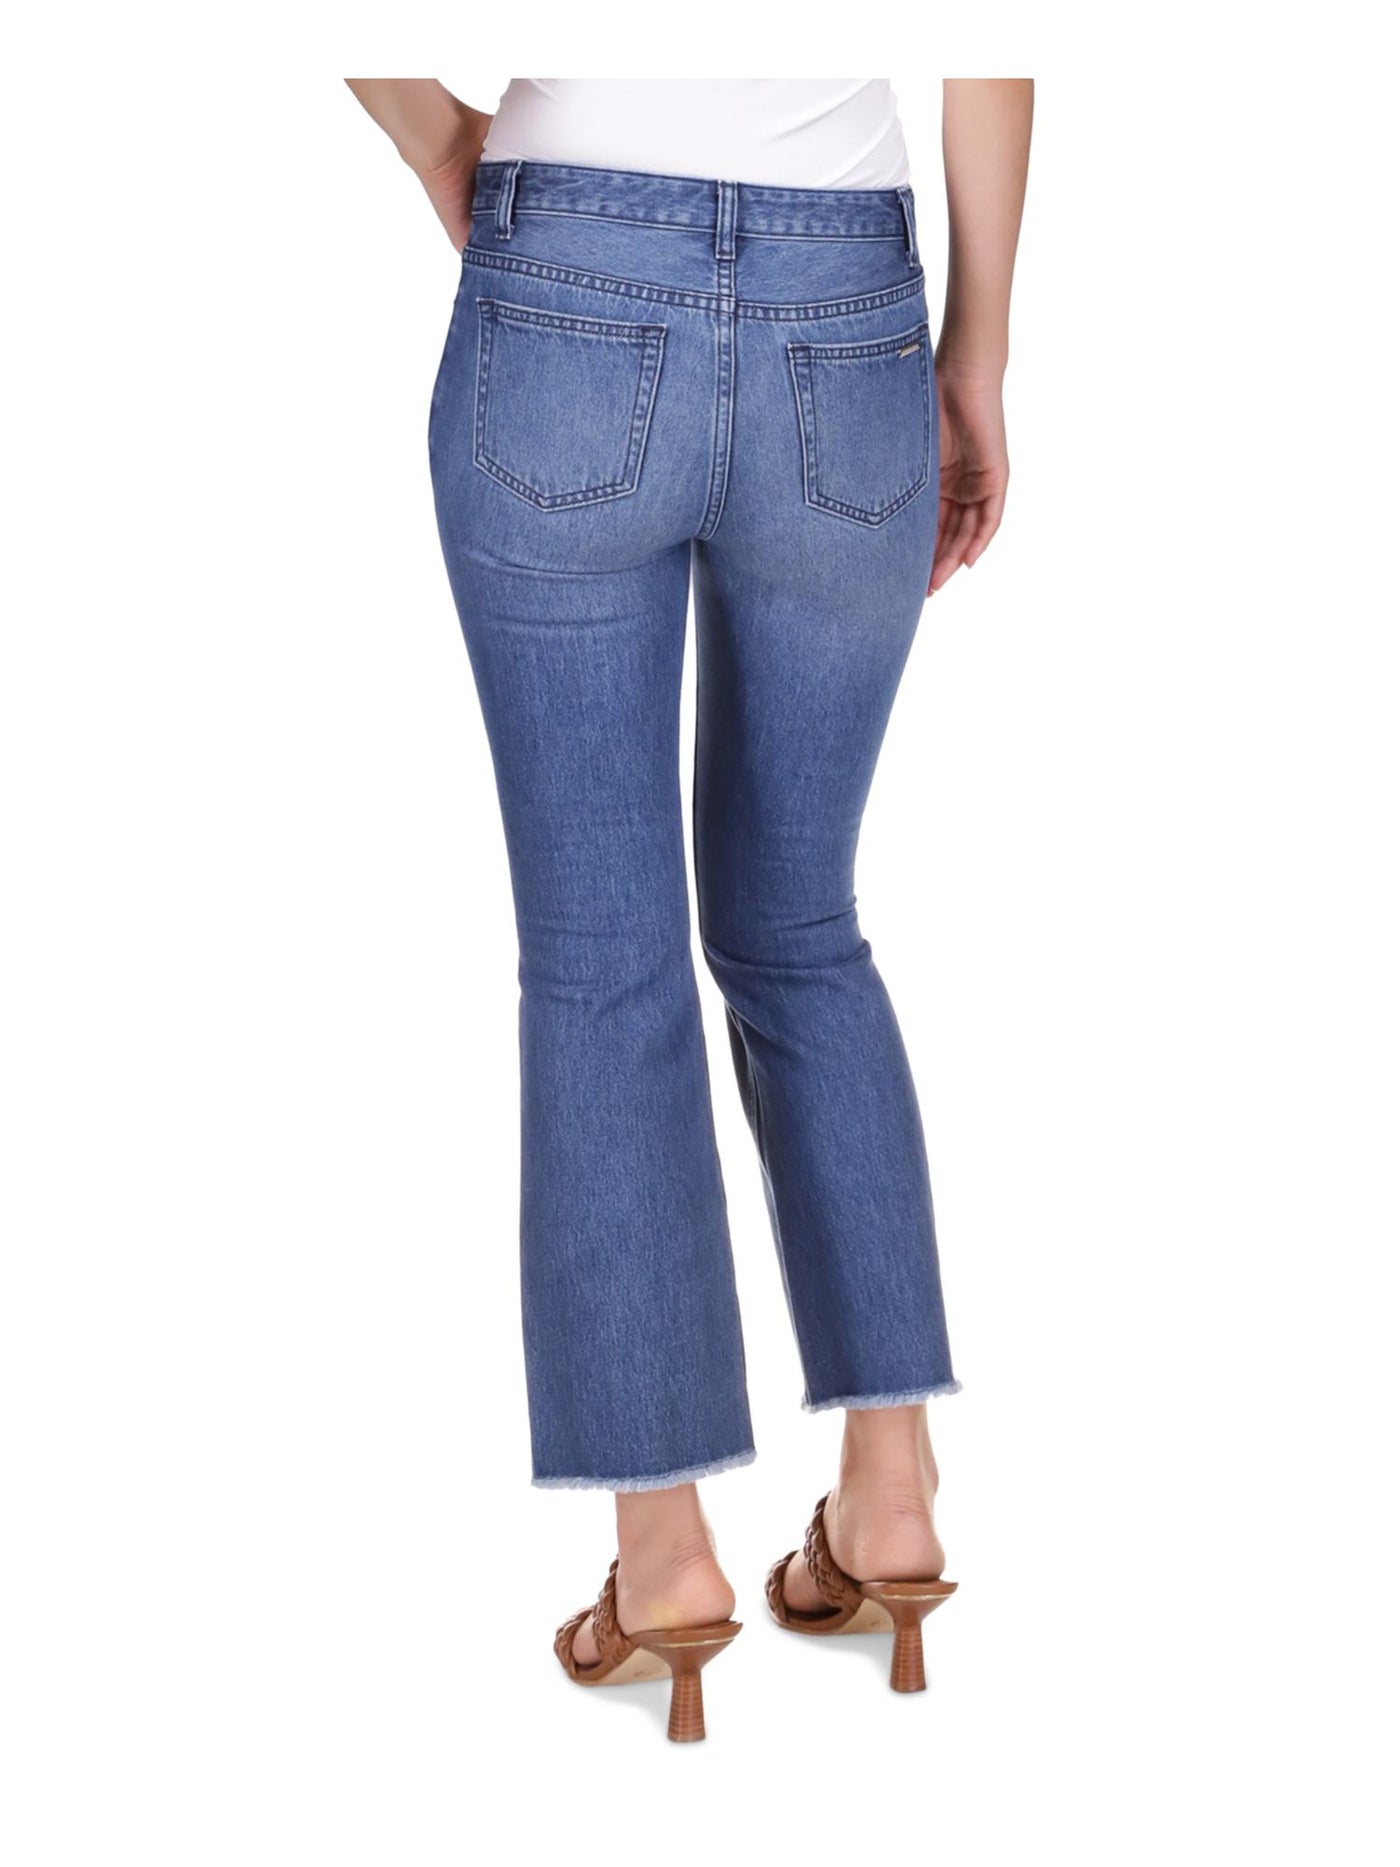 MICHAEL KORS Womens Blue Pocketed Button Fly Raw Hem Cropped Jeans Petites 2P